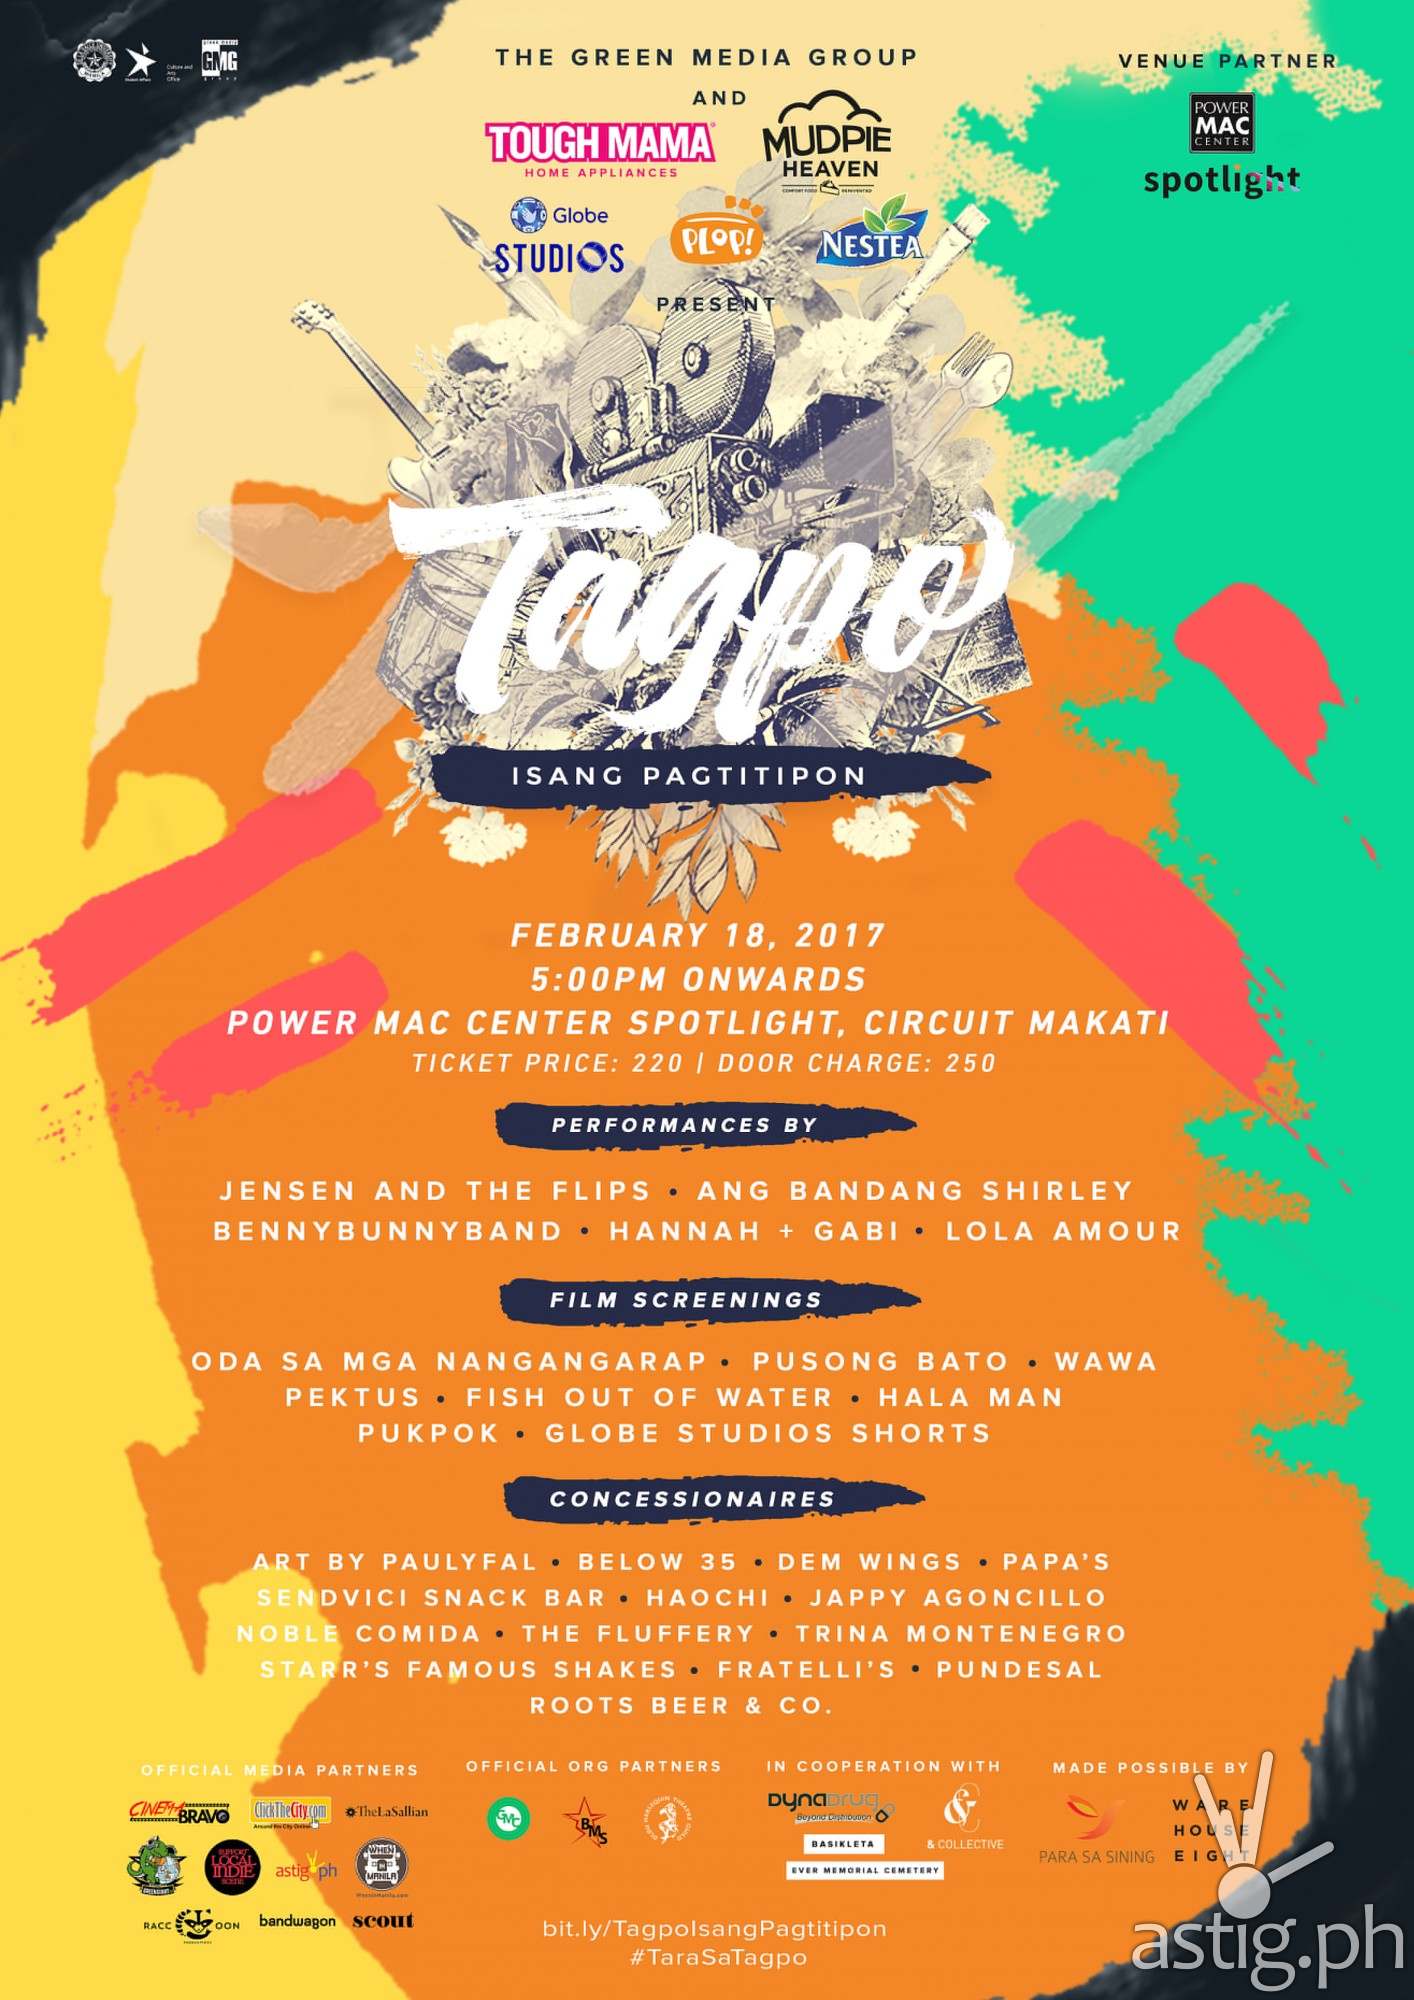 Tagpo by DLSU Green Media Group